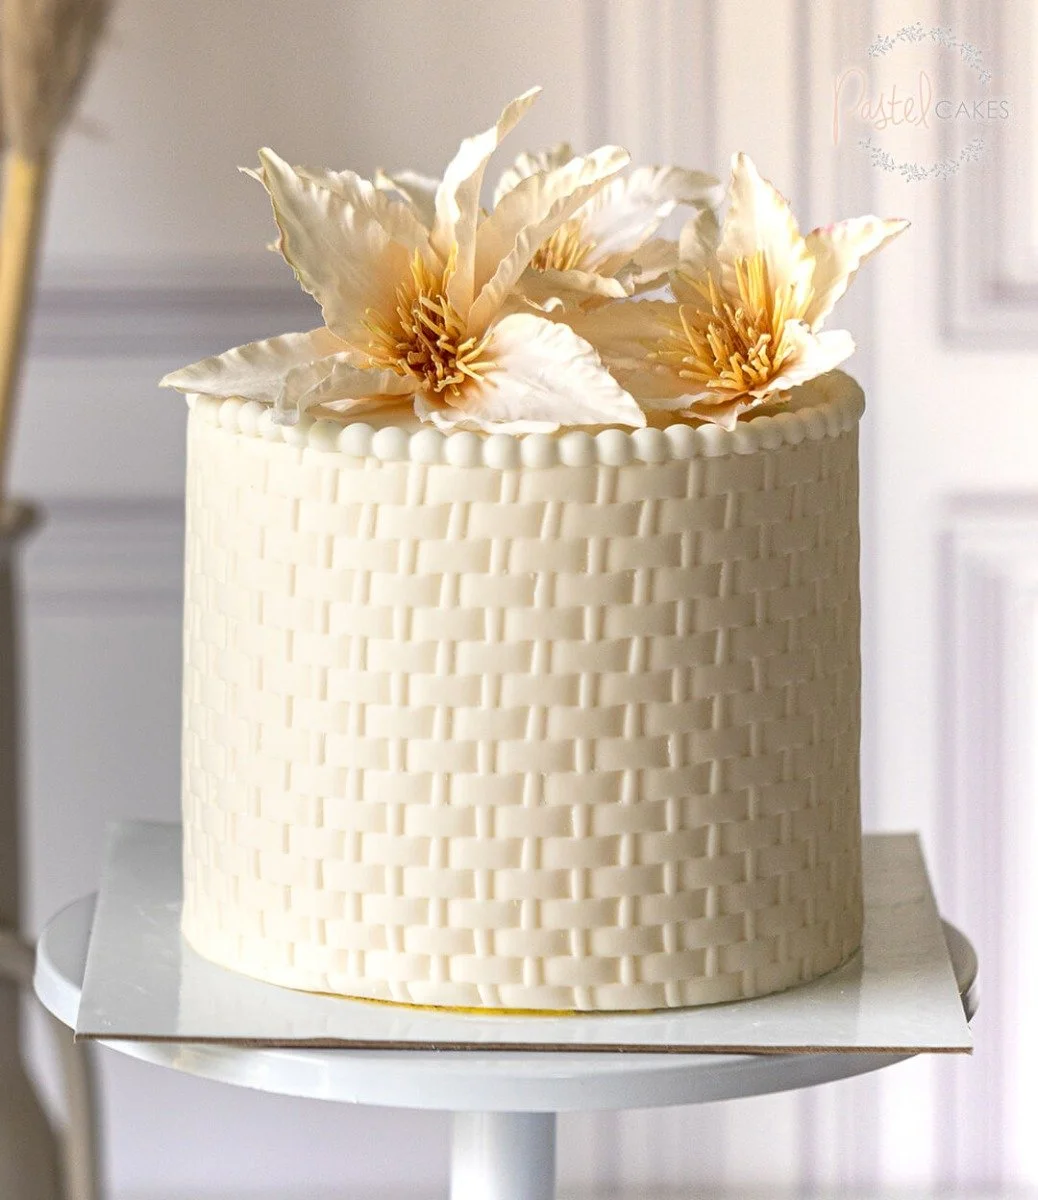 Lily Cake By Pastel Cakes